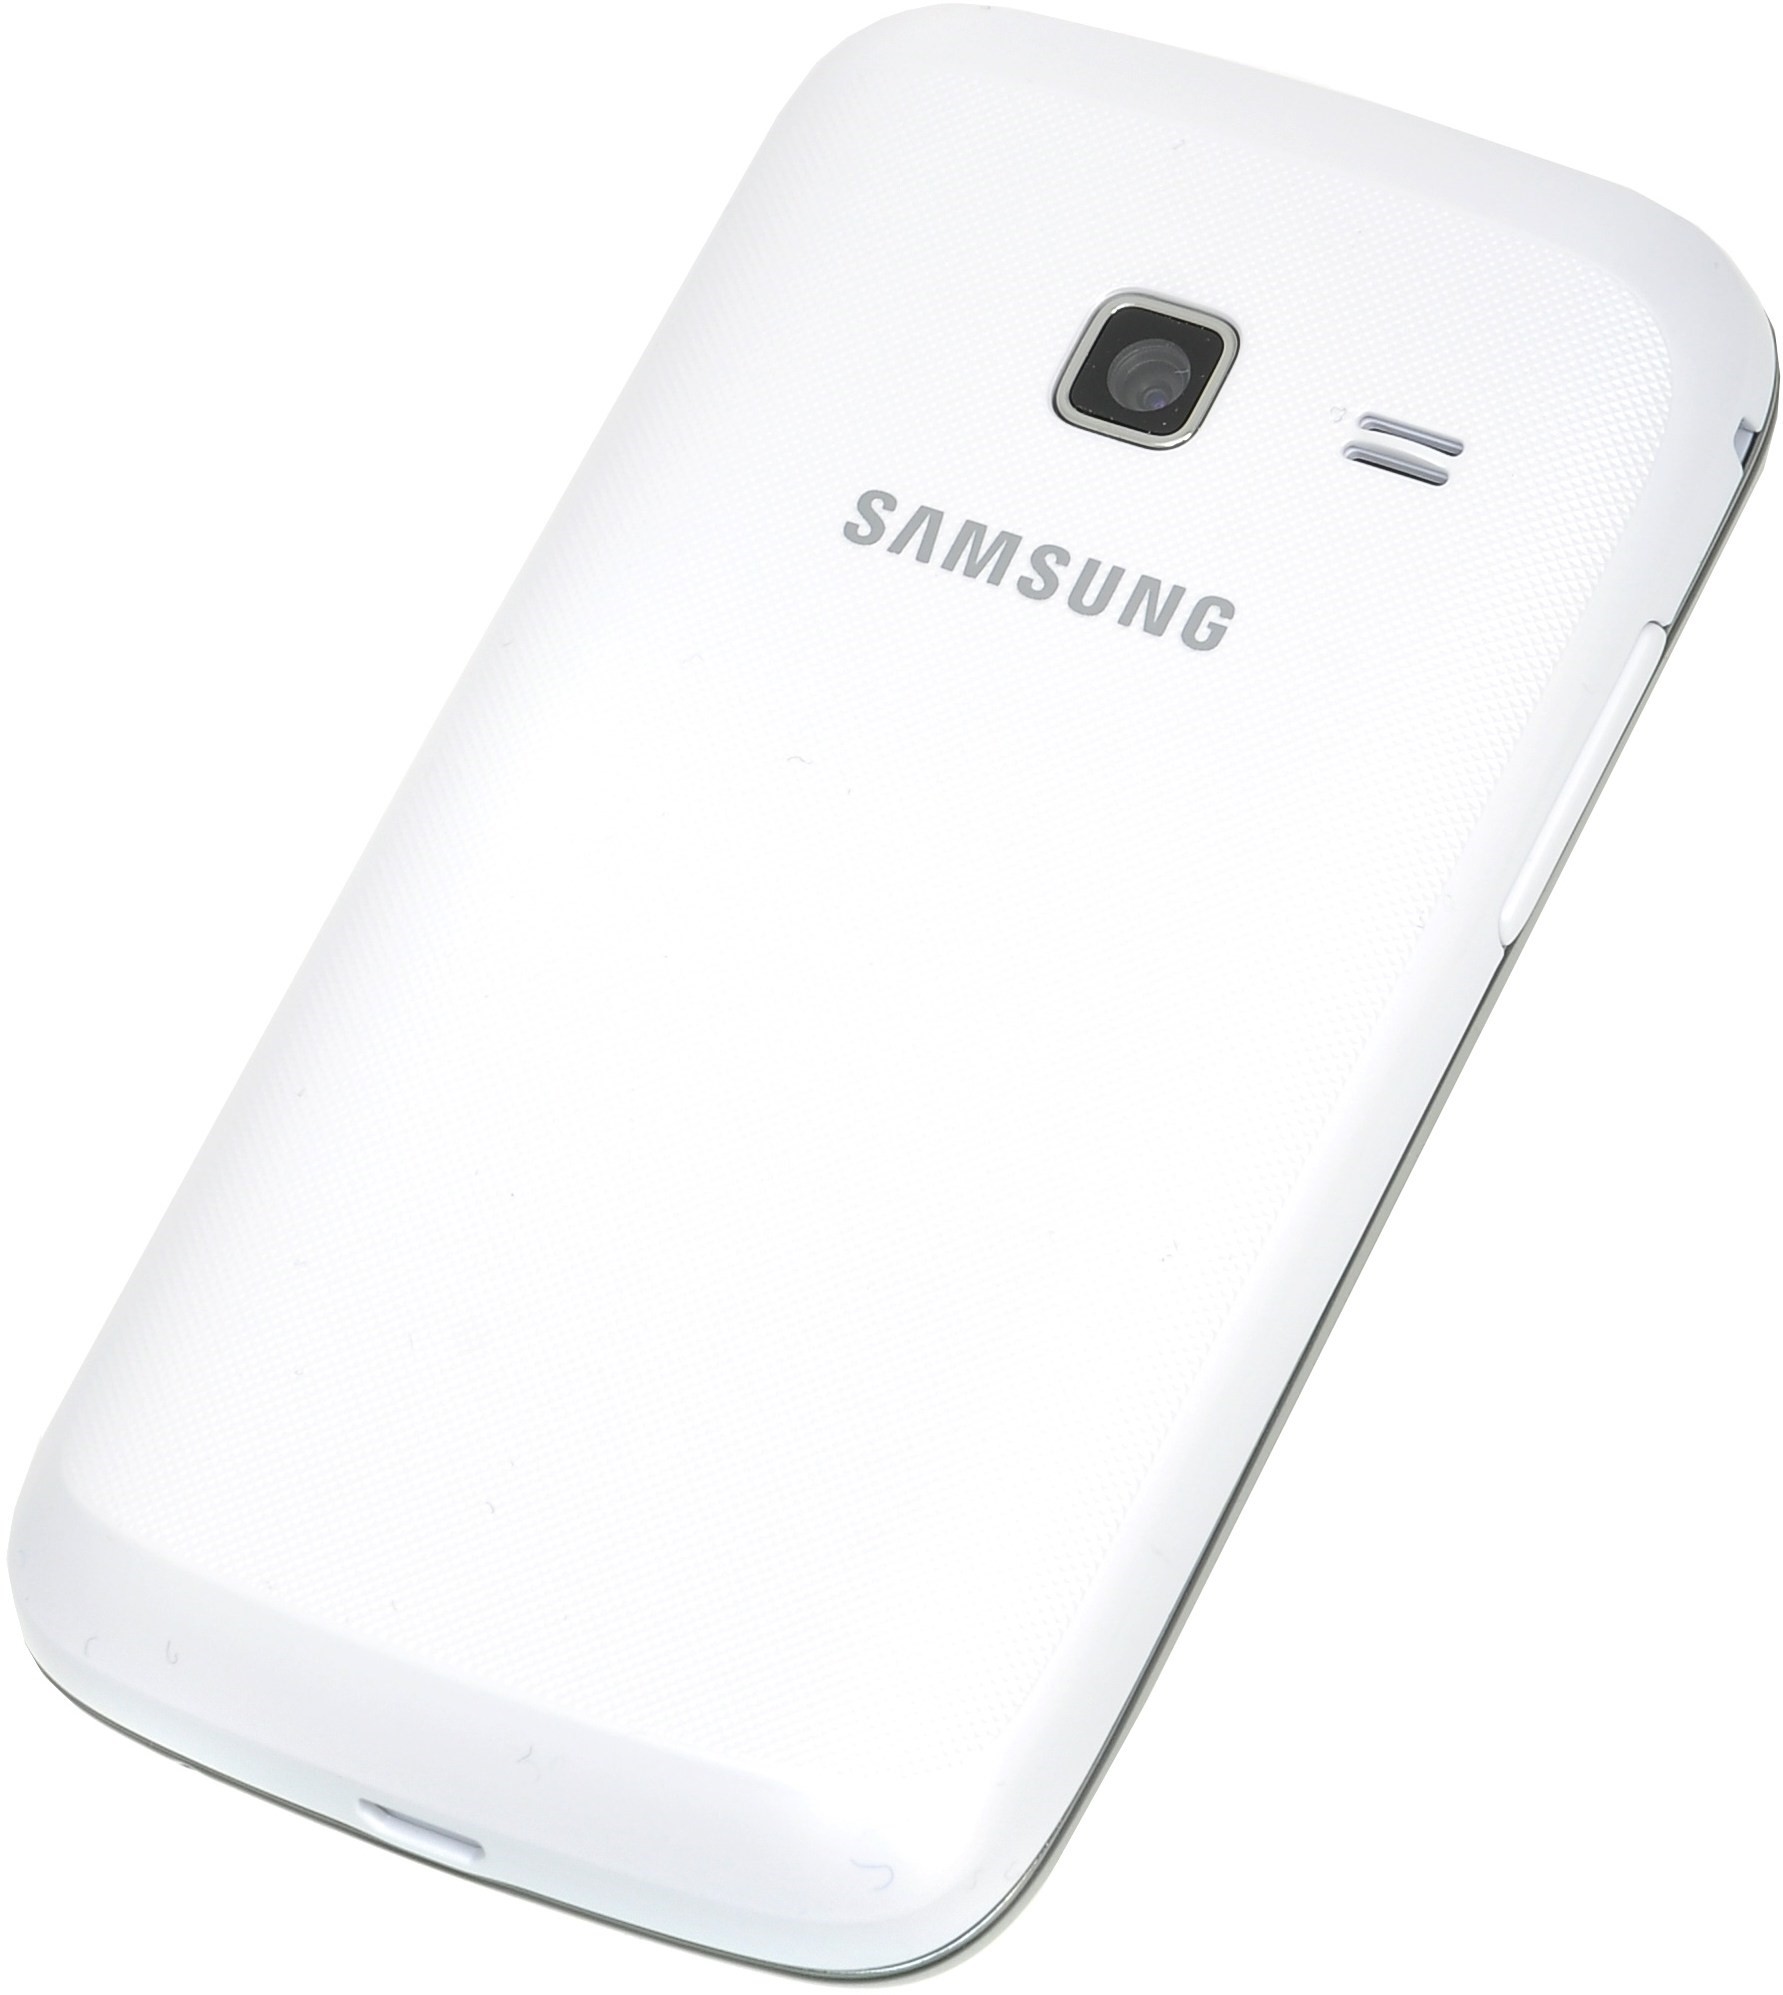 Samsung Galaxy Y Duos S6102 Pure White | Apps Directories